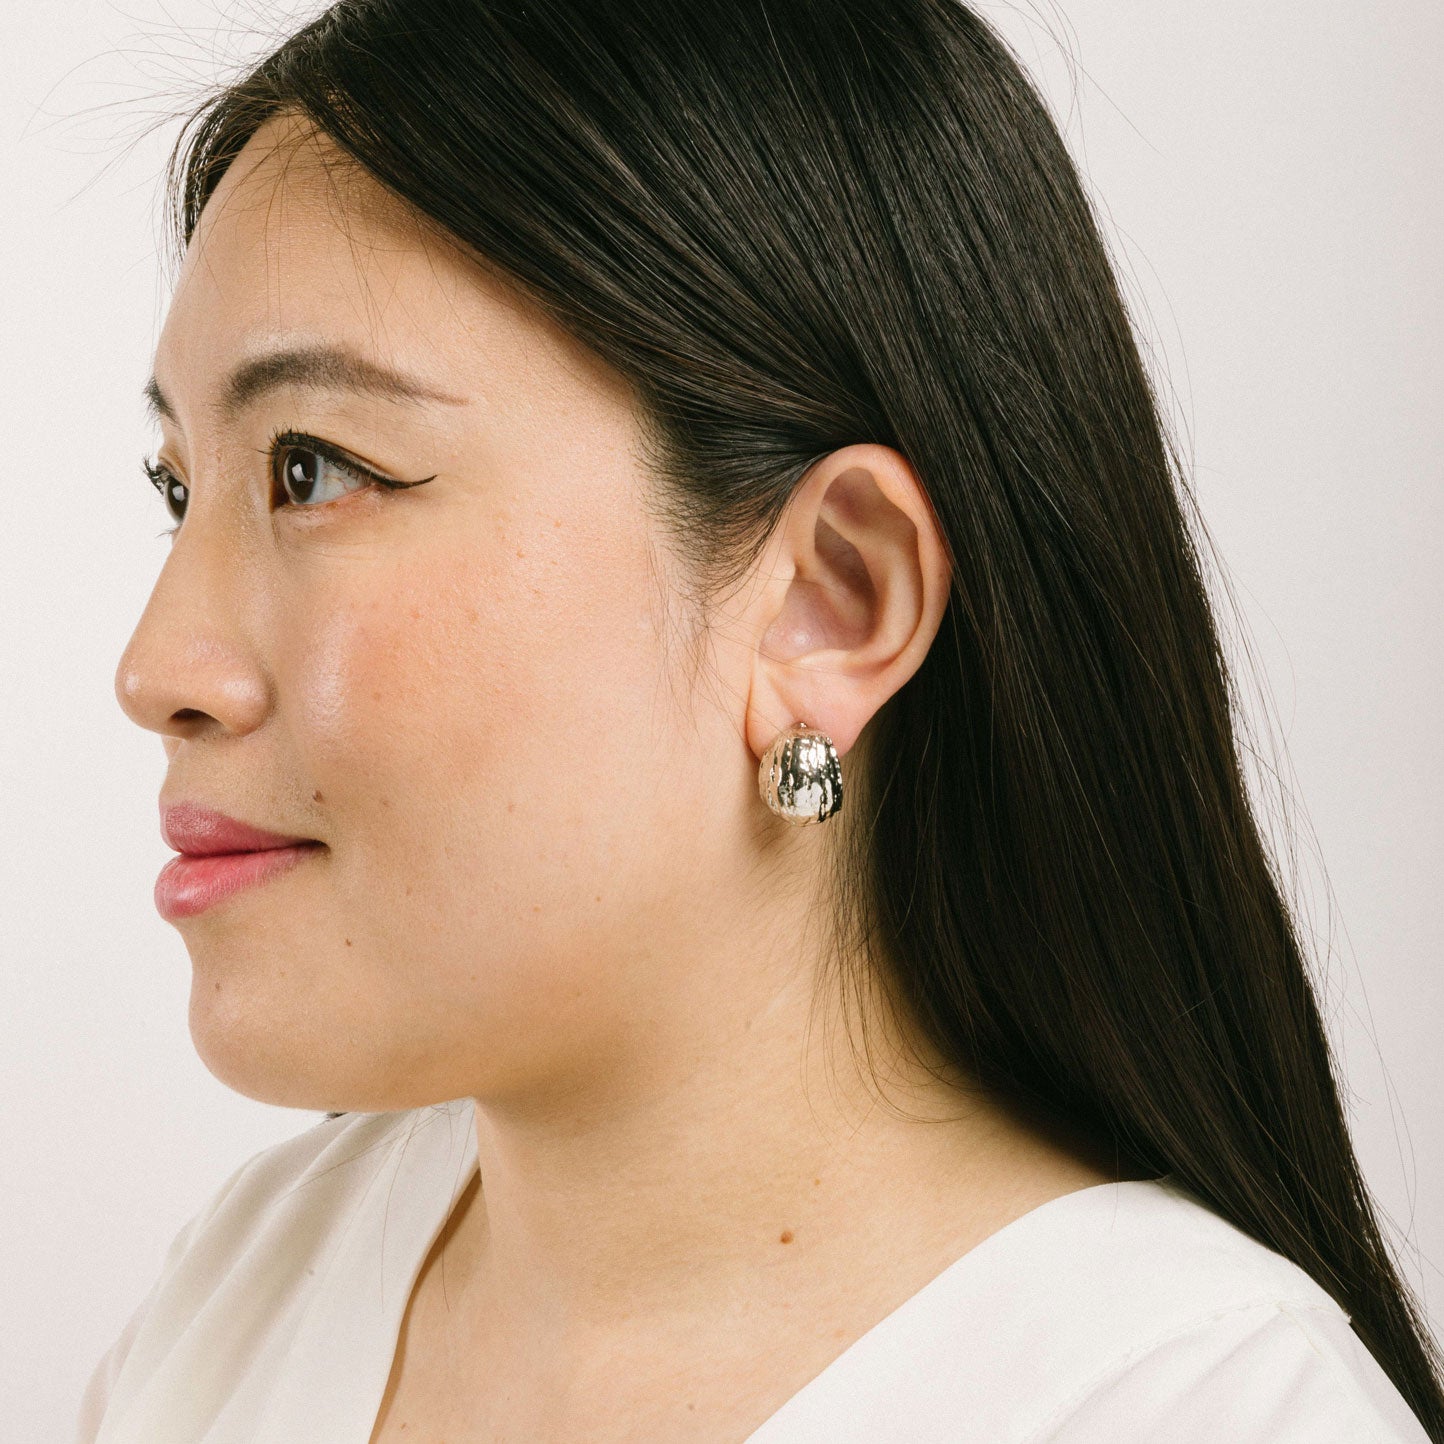 A model wearing the Alaia Clip On Earrings in Silver feature a padded clip-on closure, offering secure hold and ideal comfort for 8-12 hours of wear, for ear types of all shapes and sizes. Crafted from gold tone copper alloy, these earrings feature a single pair per item.